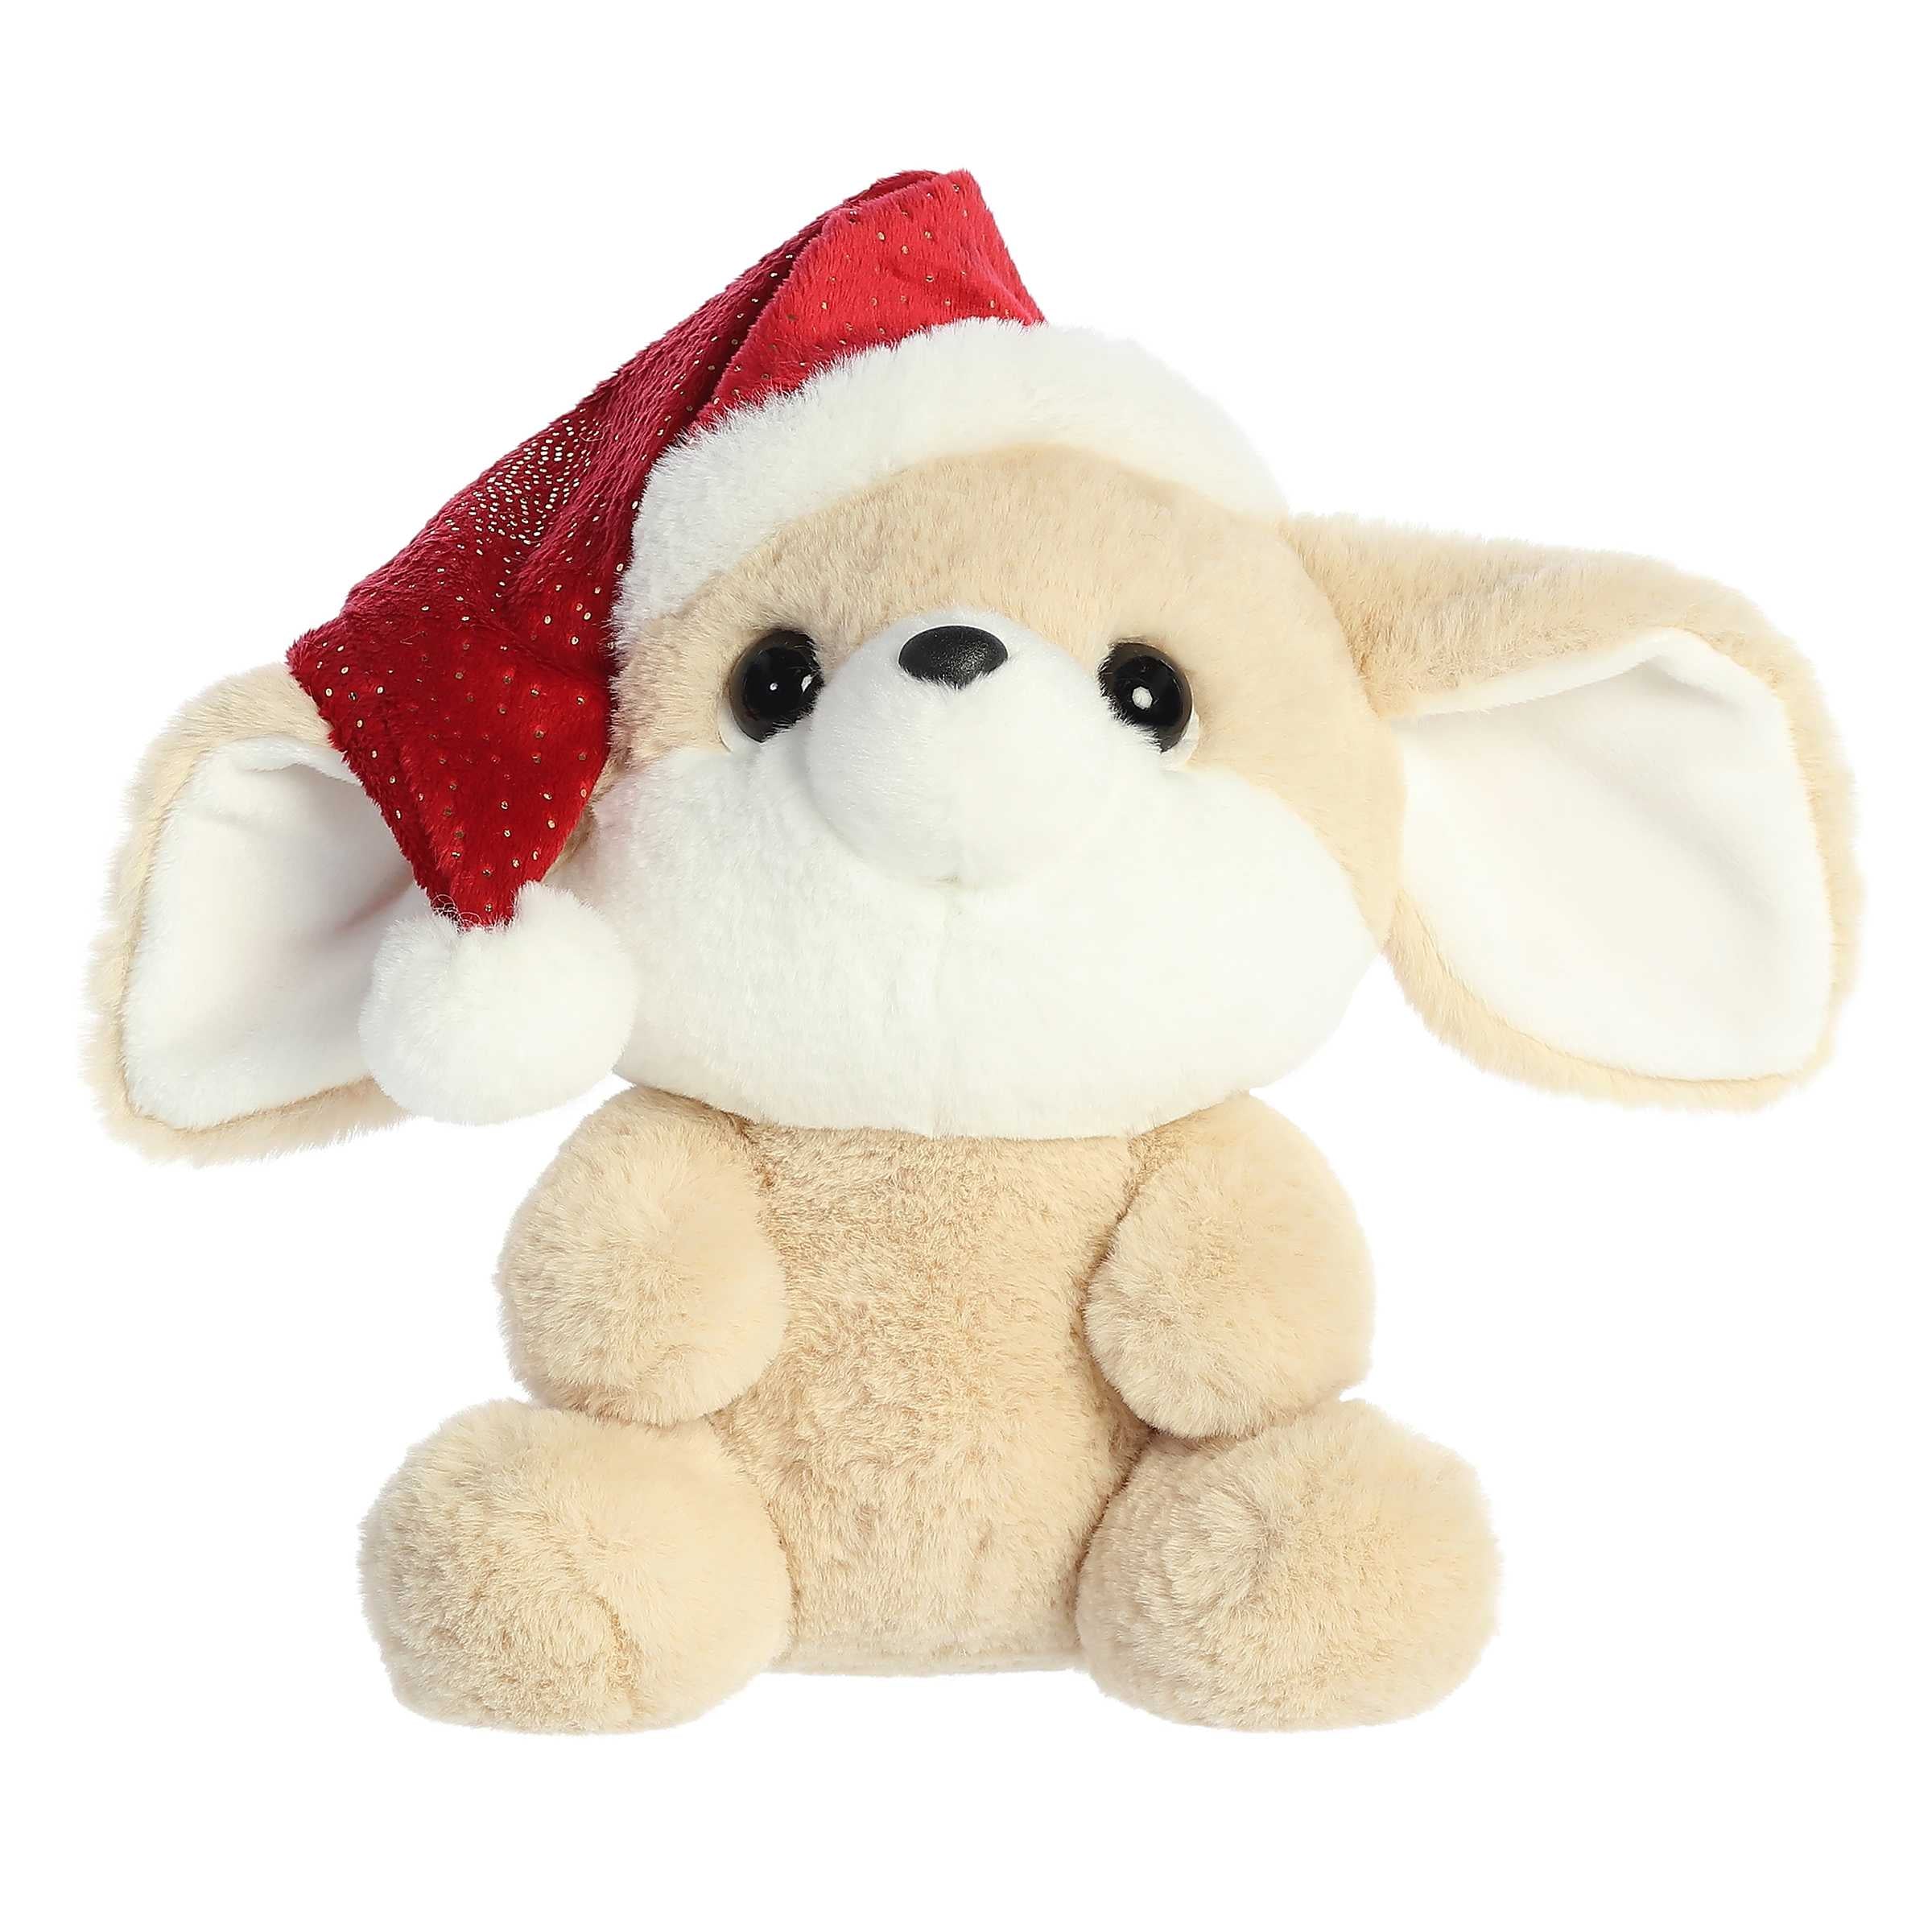 Cream fennec fox stuffed animal with endering eyes wearing a Santa hat that slides off one side of its big head